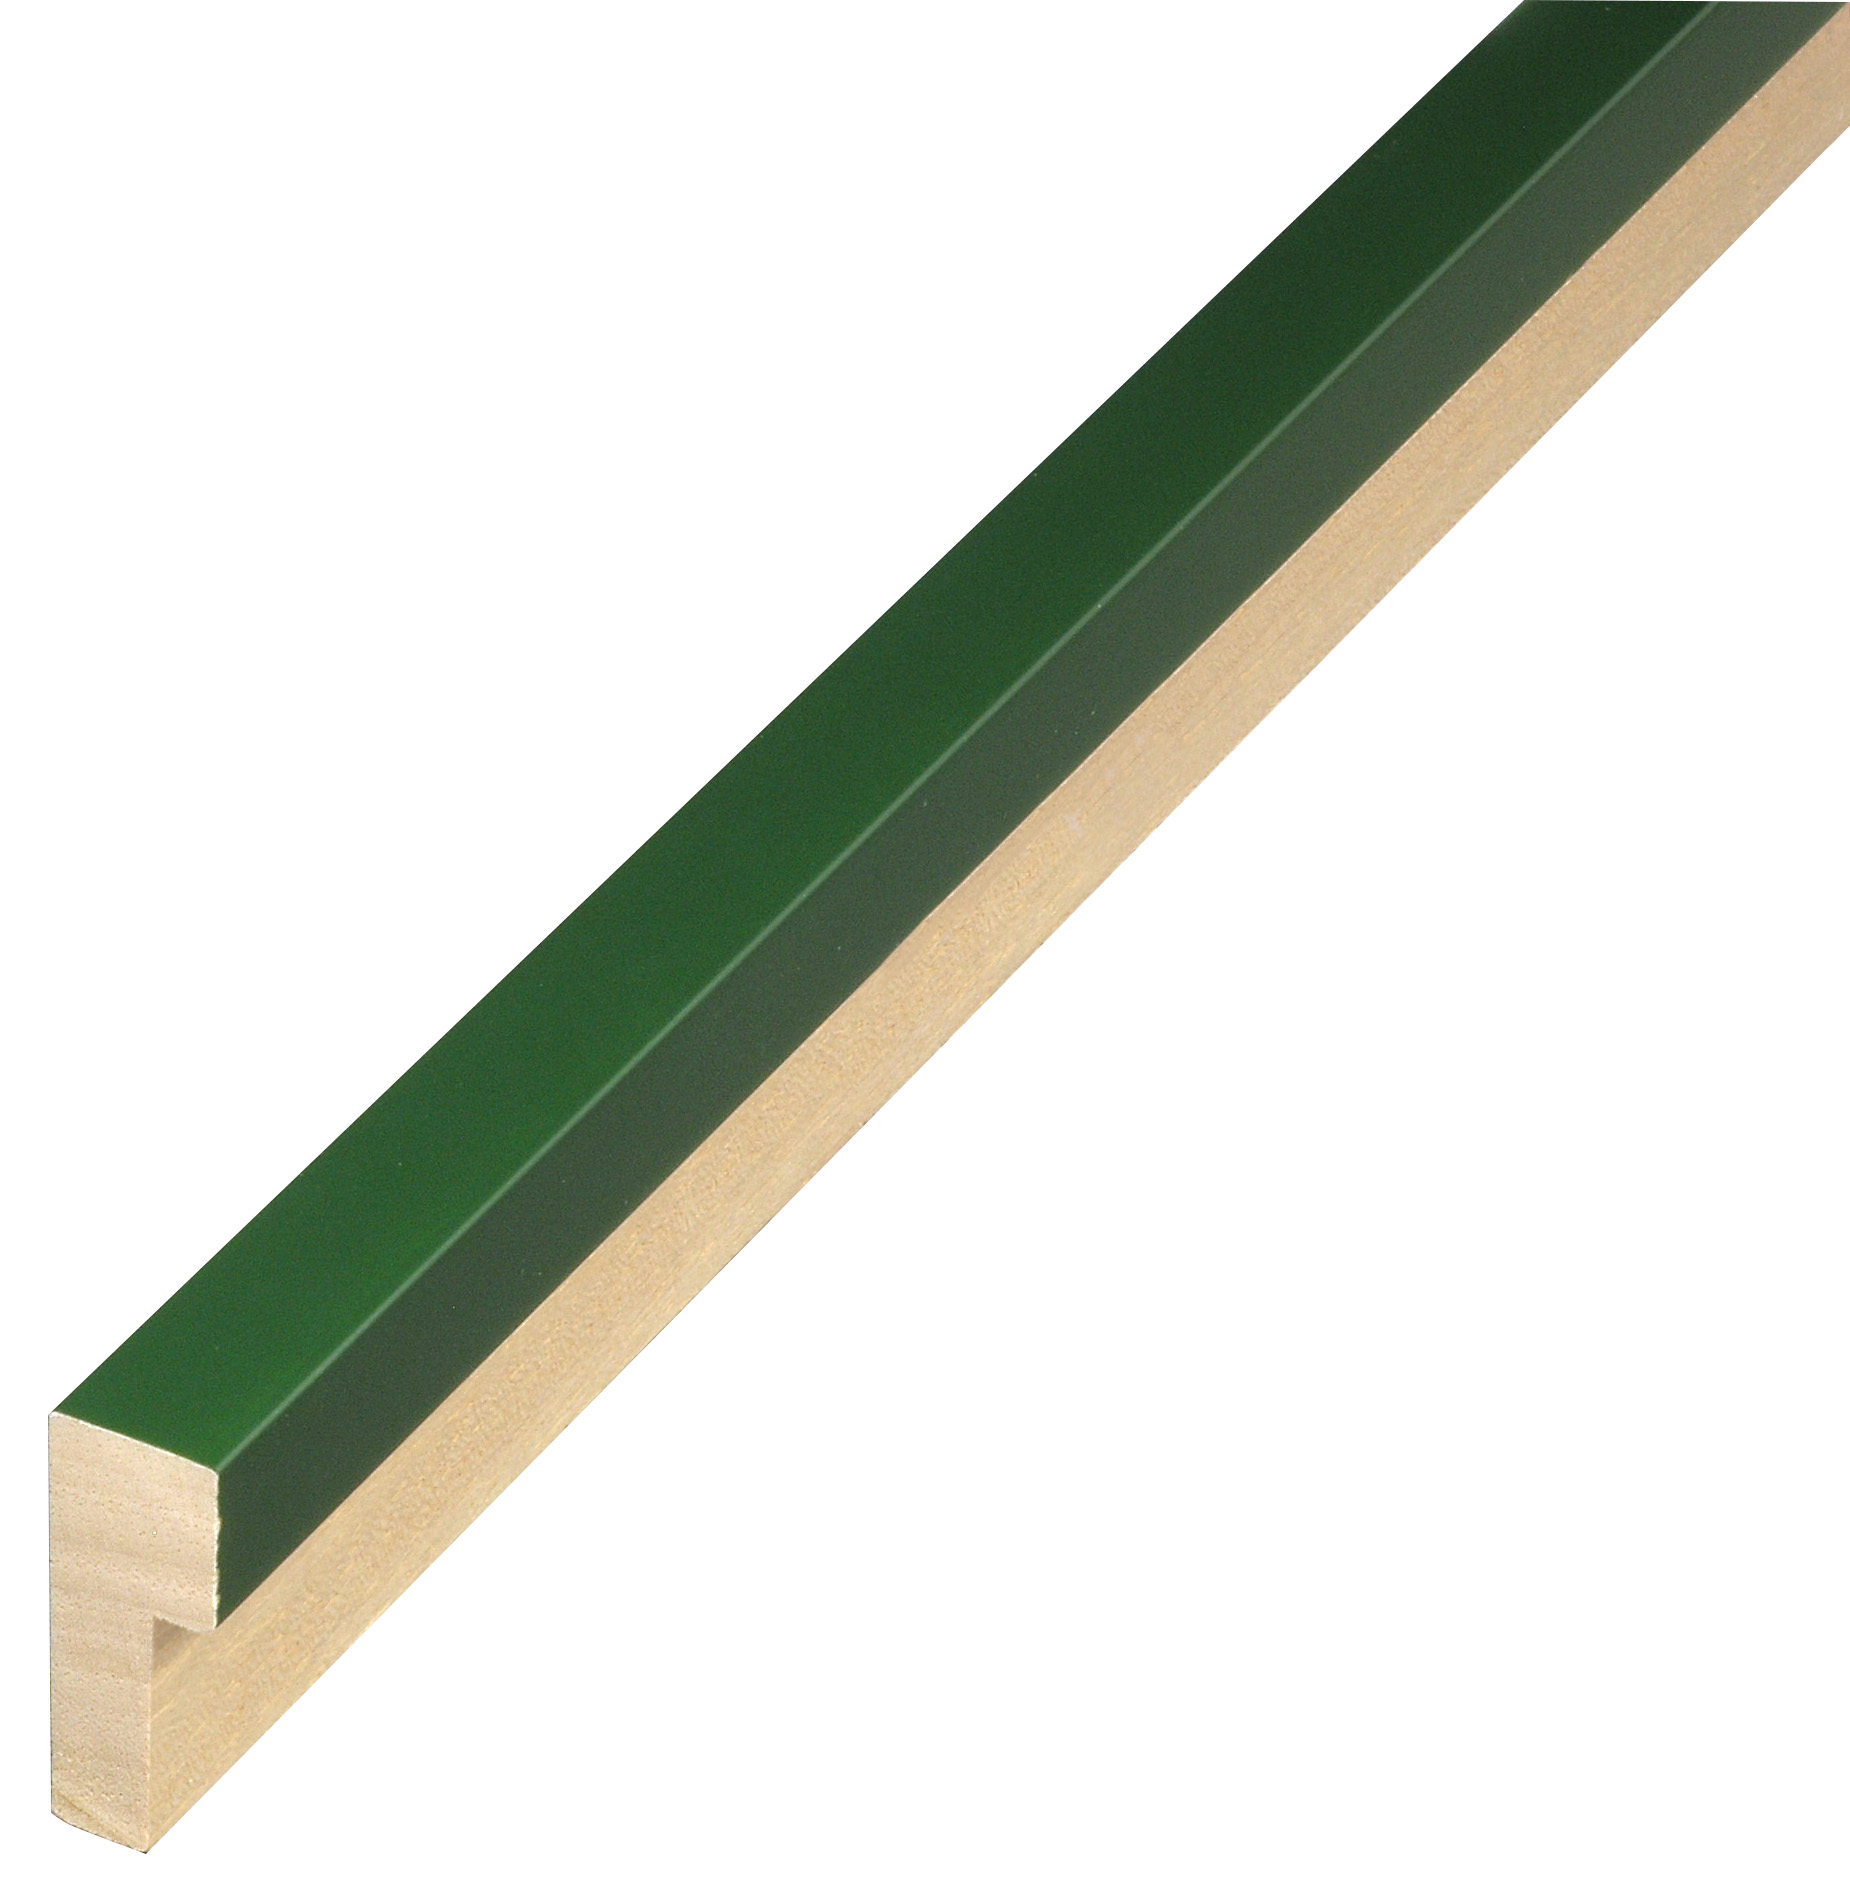 Moulding ayous - Widht 15 mm - Height 40 mm - Green